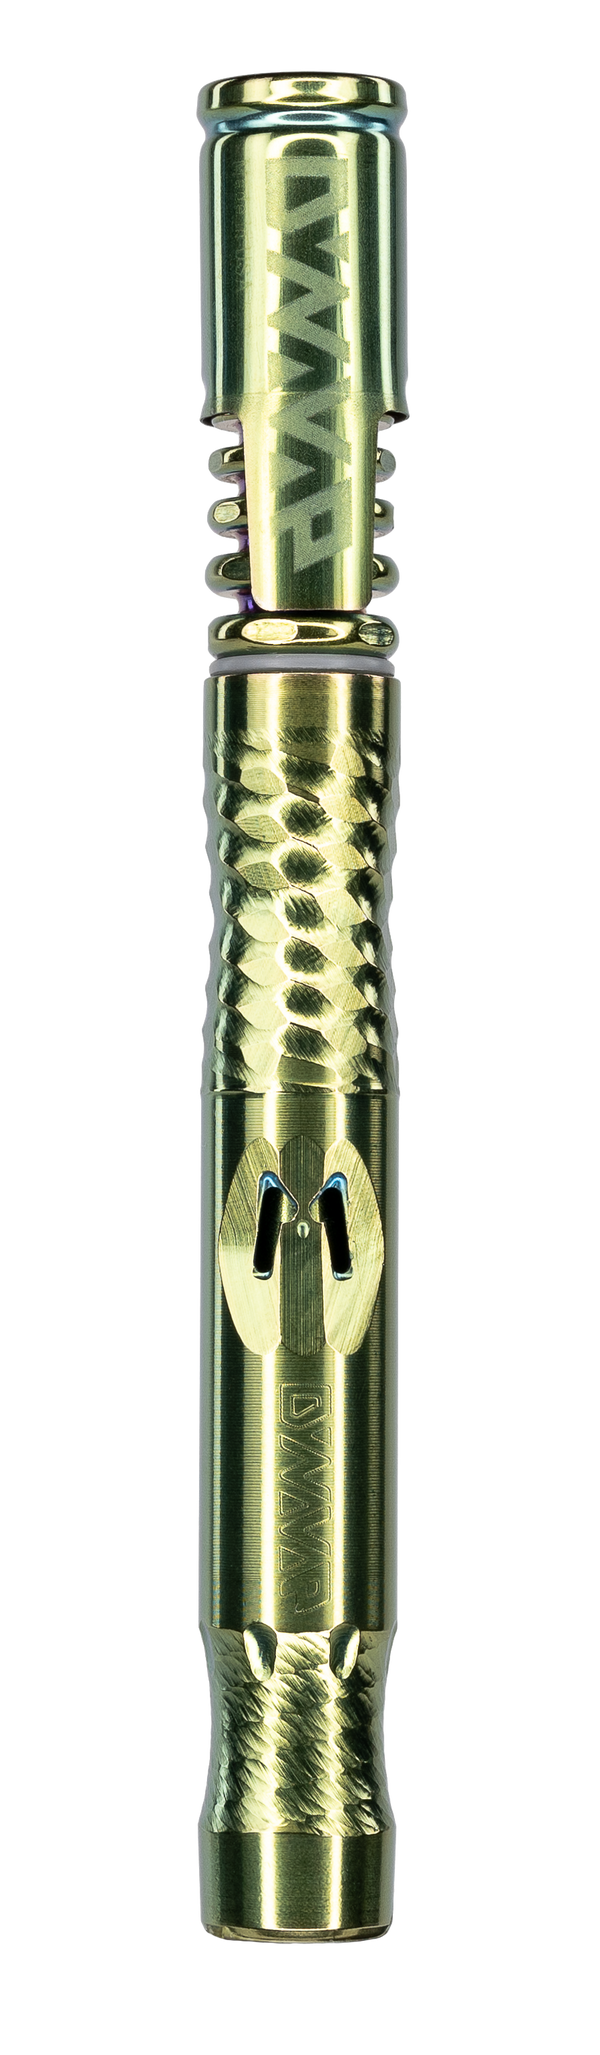 This is the DynaVap "M" is Verdium finish (light green coloring) available at Ritual.